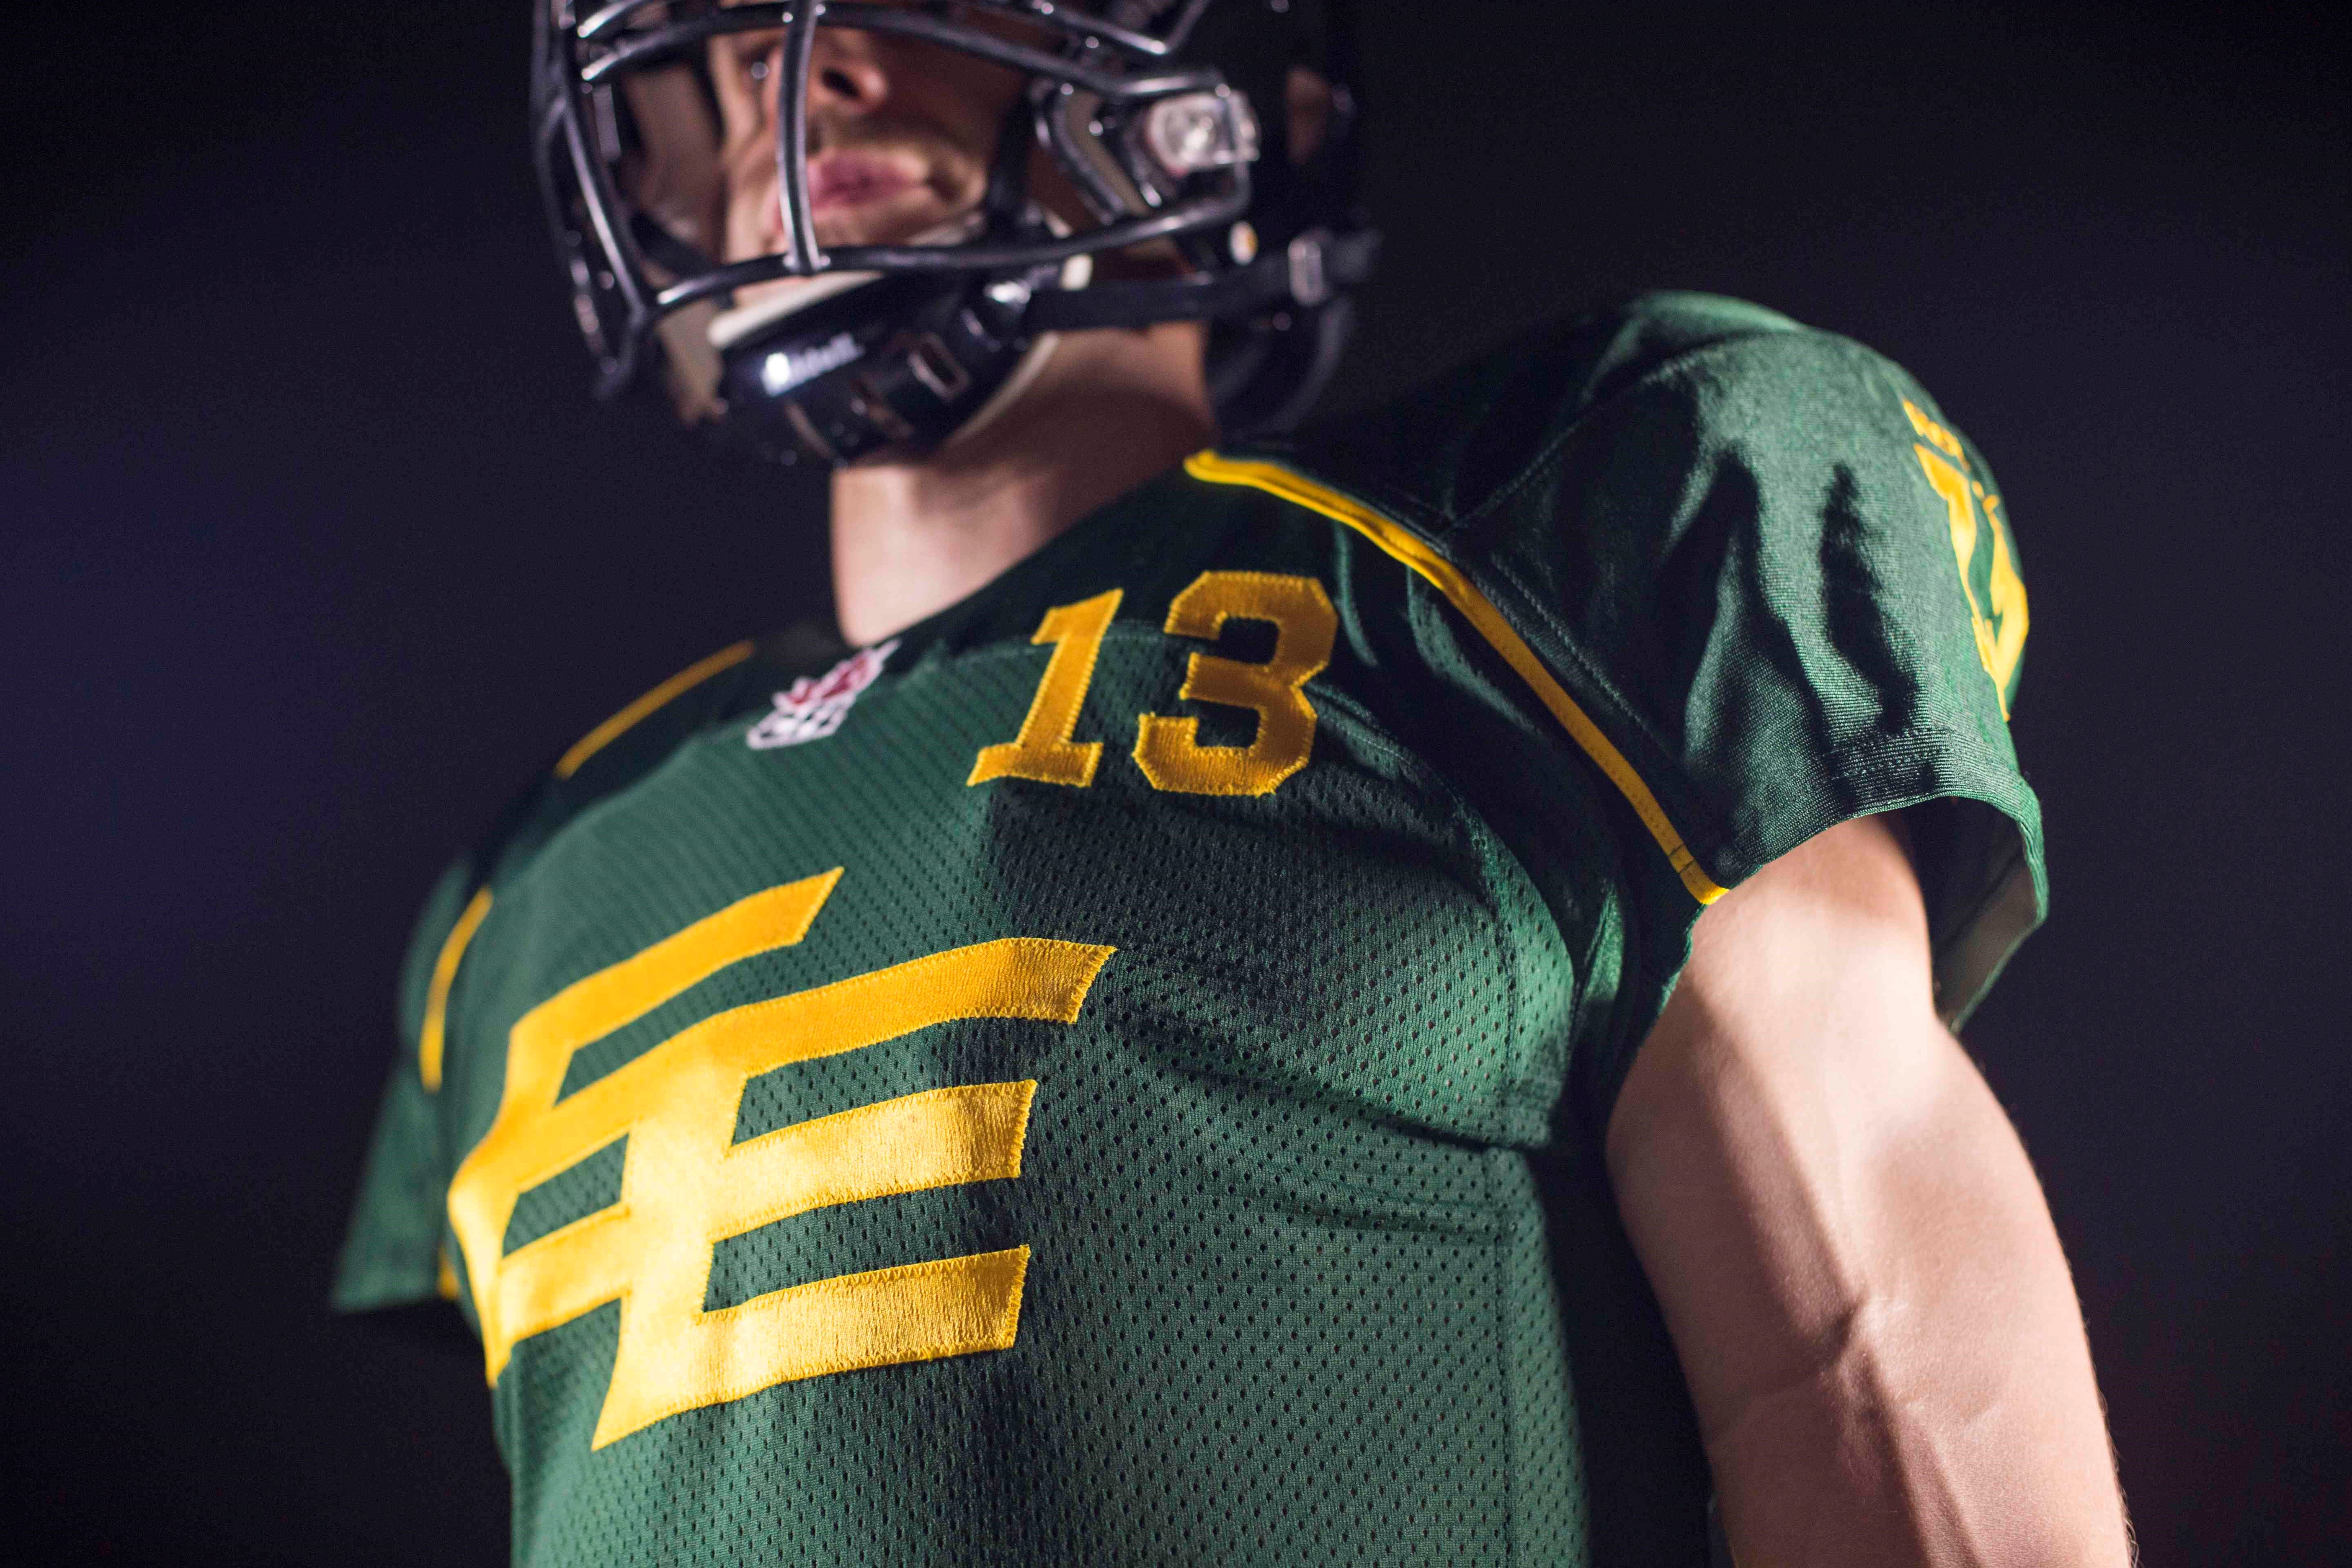 CFL's new West Division jerseys unveiled: how do they stack up?